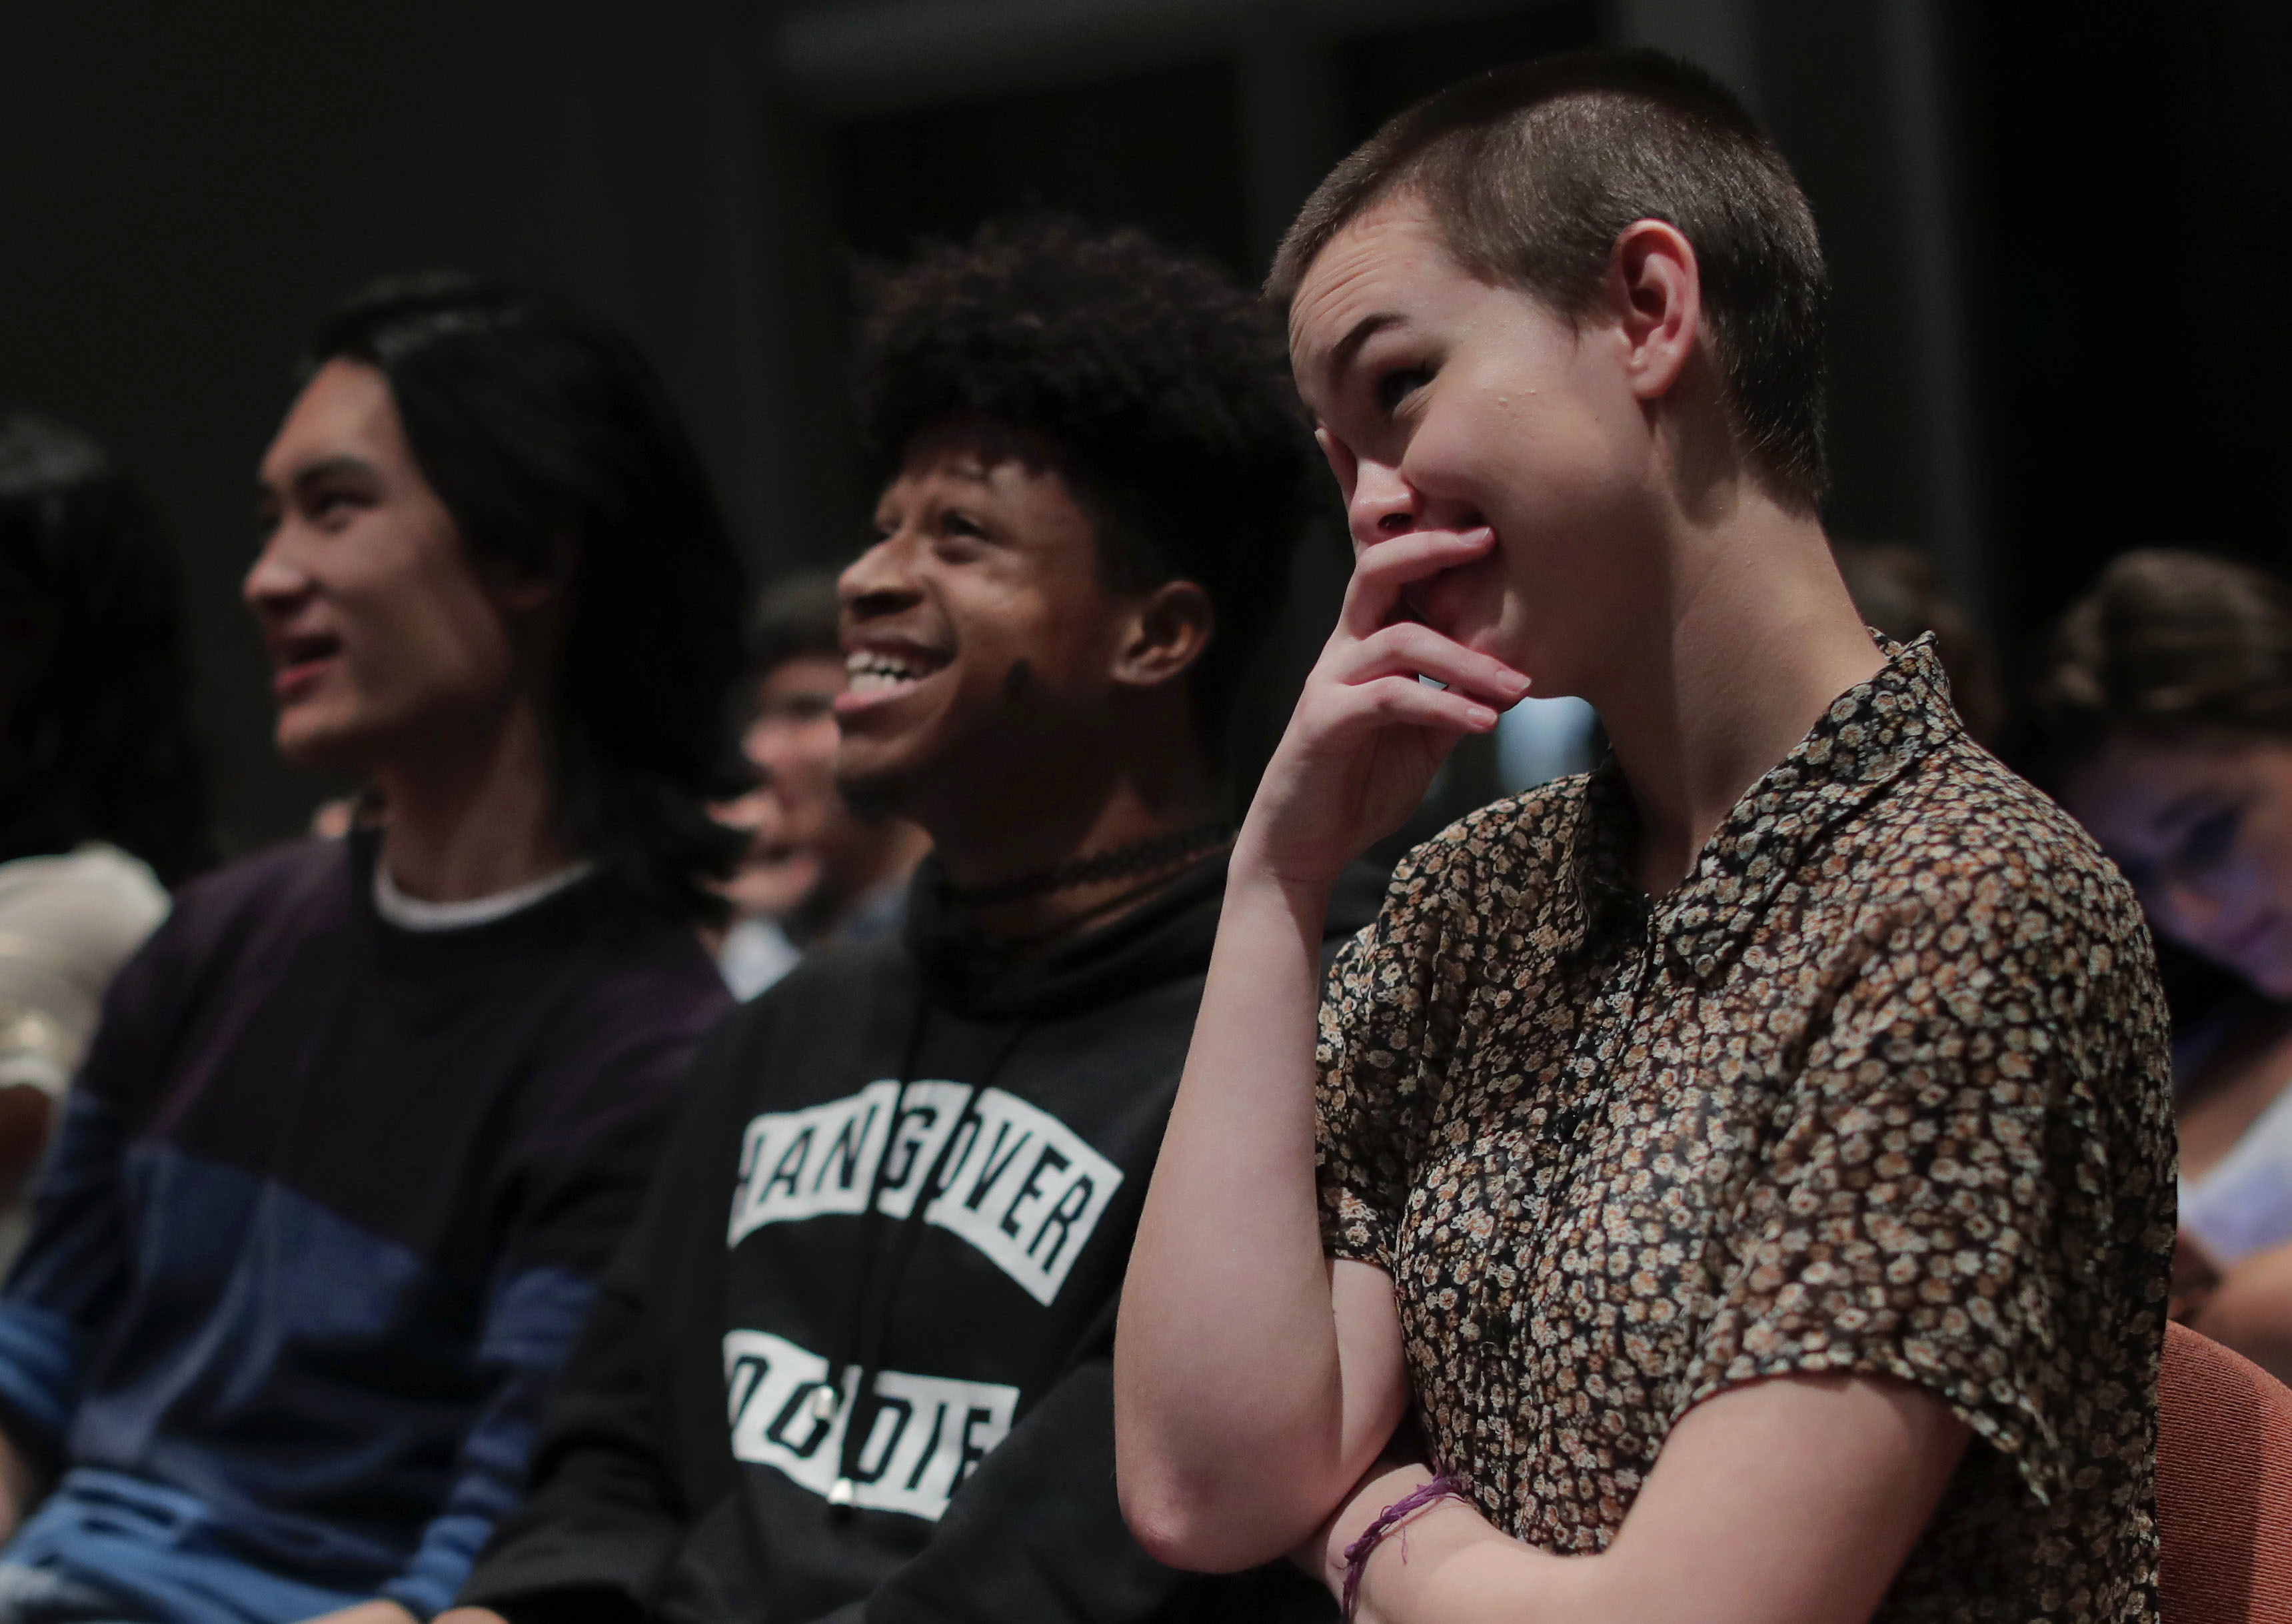 NYU students react while watching the presidential debate between Democratic candidate Hillary Clinton and Republican candidate Donald Trump during a debate watch gathering, Wednesday, Oct. 19, 2016, in New York. (AP Photo/Julie Jacobson)